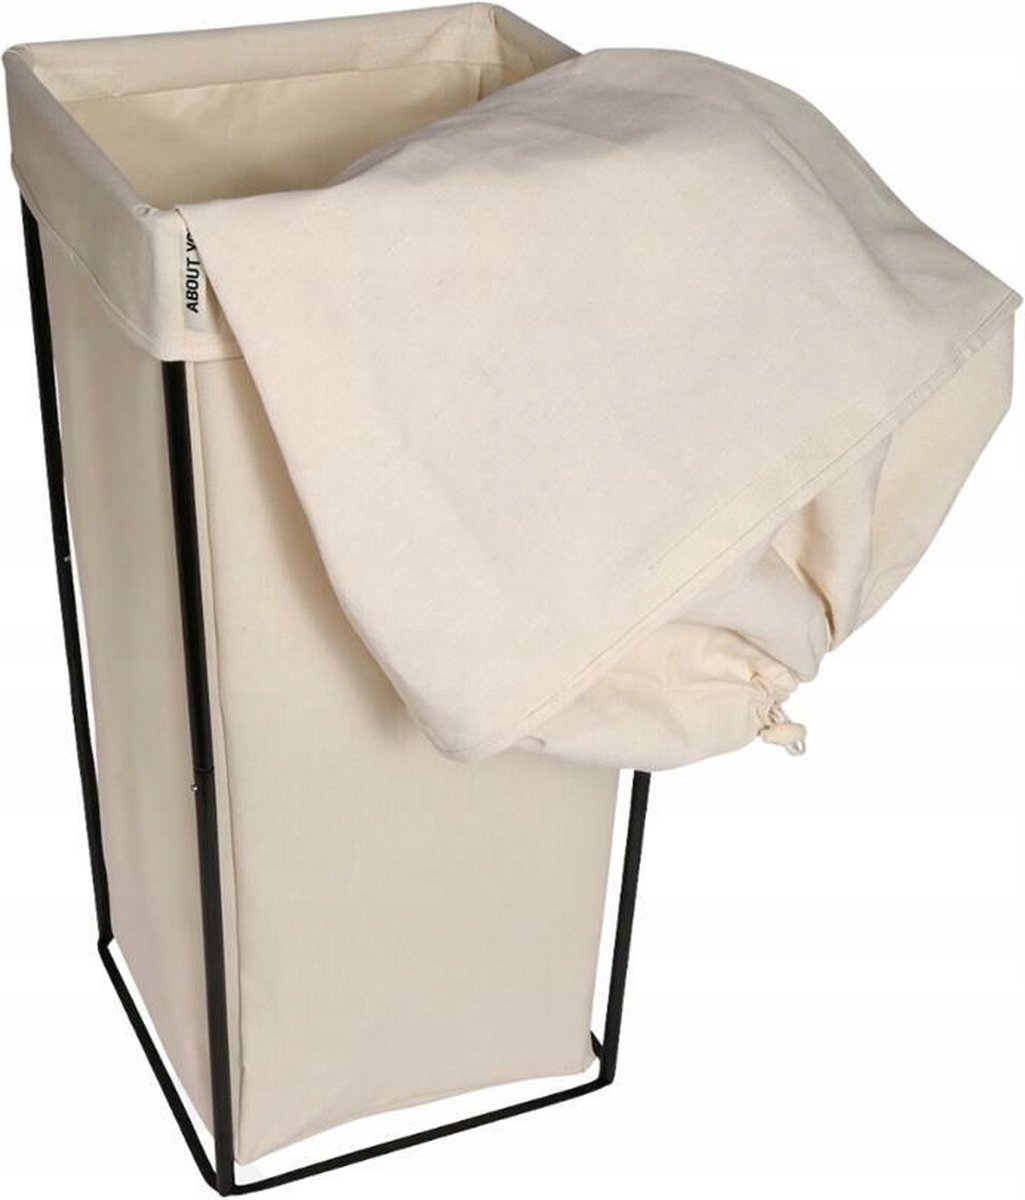 About You wasmand - Beige - 71 cm